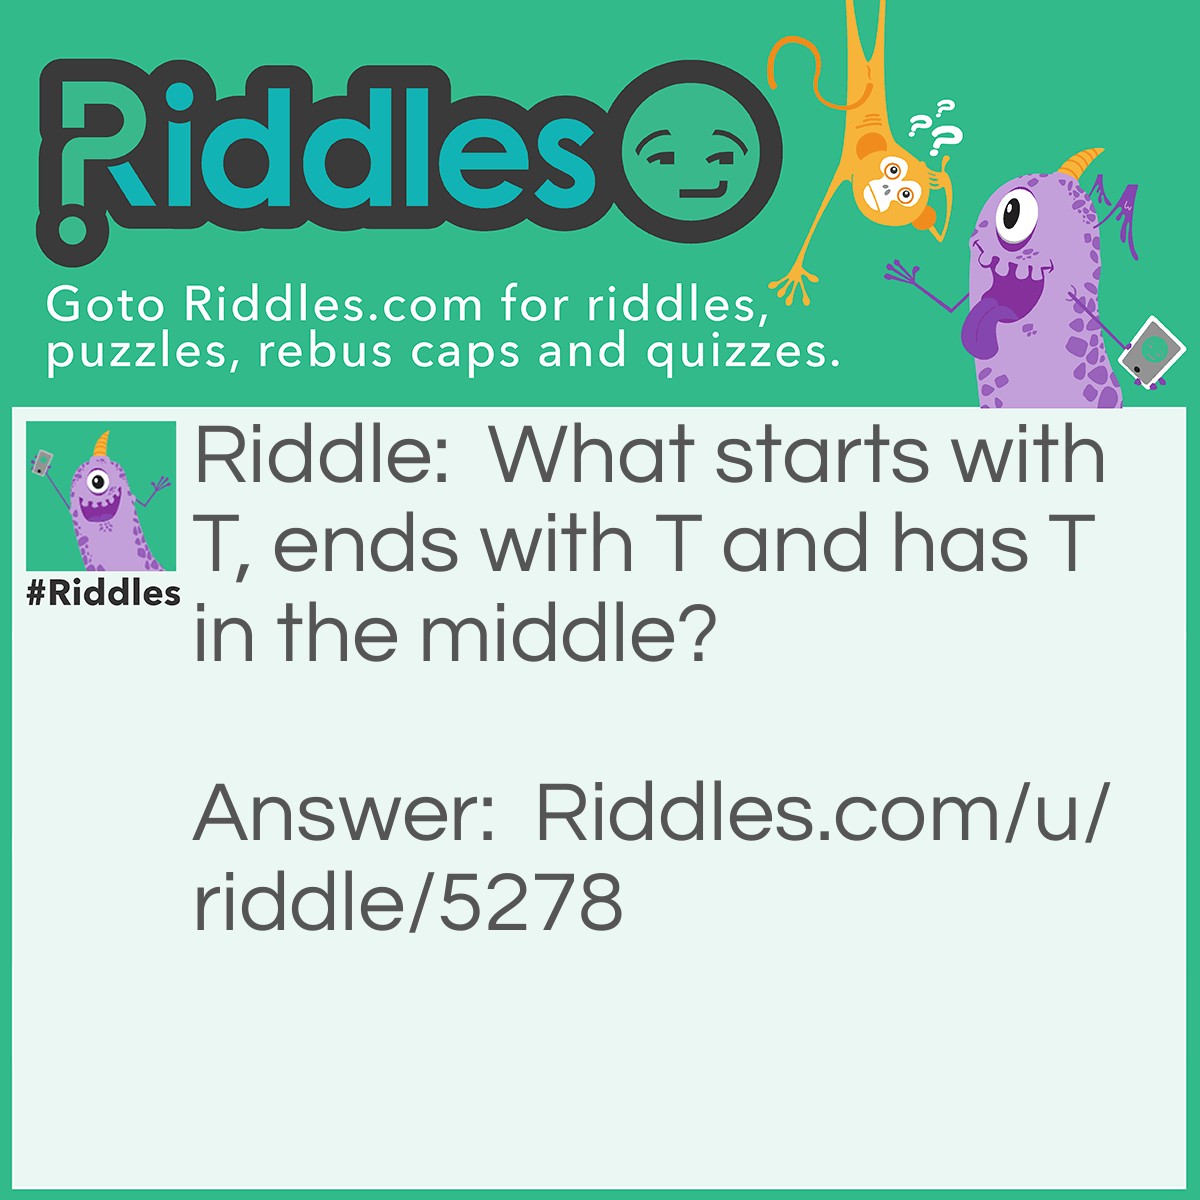 Riddle: What starts with T, ends with T and has T in the middle? Answer: A teapot!